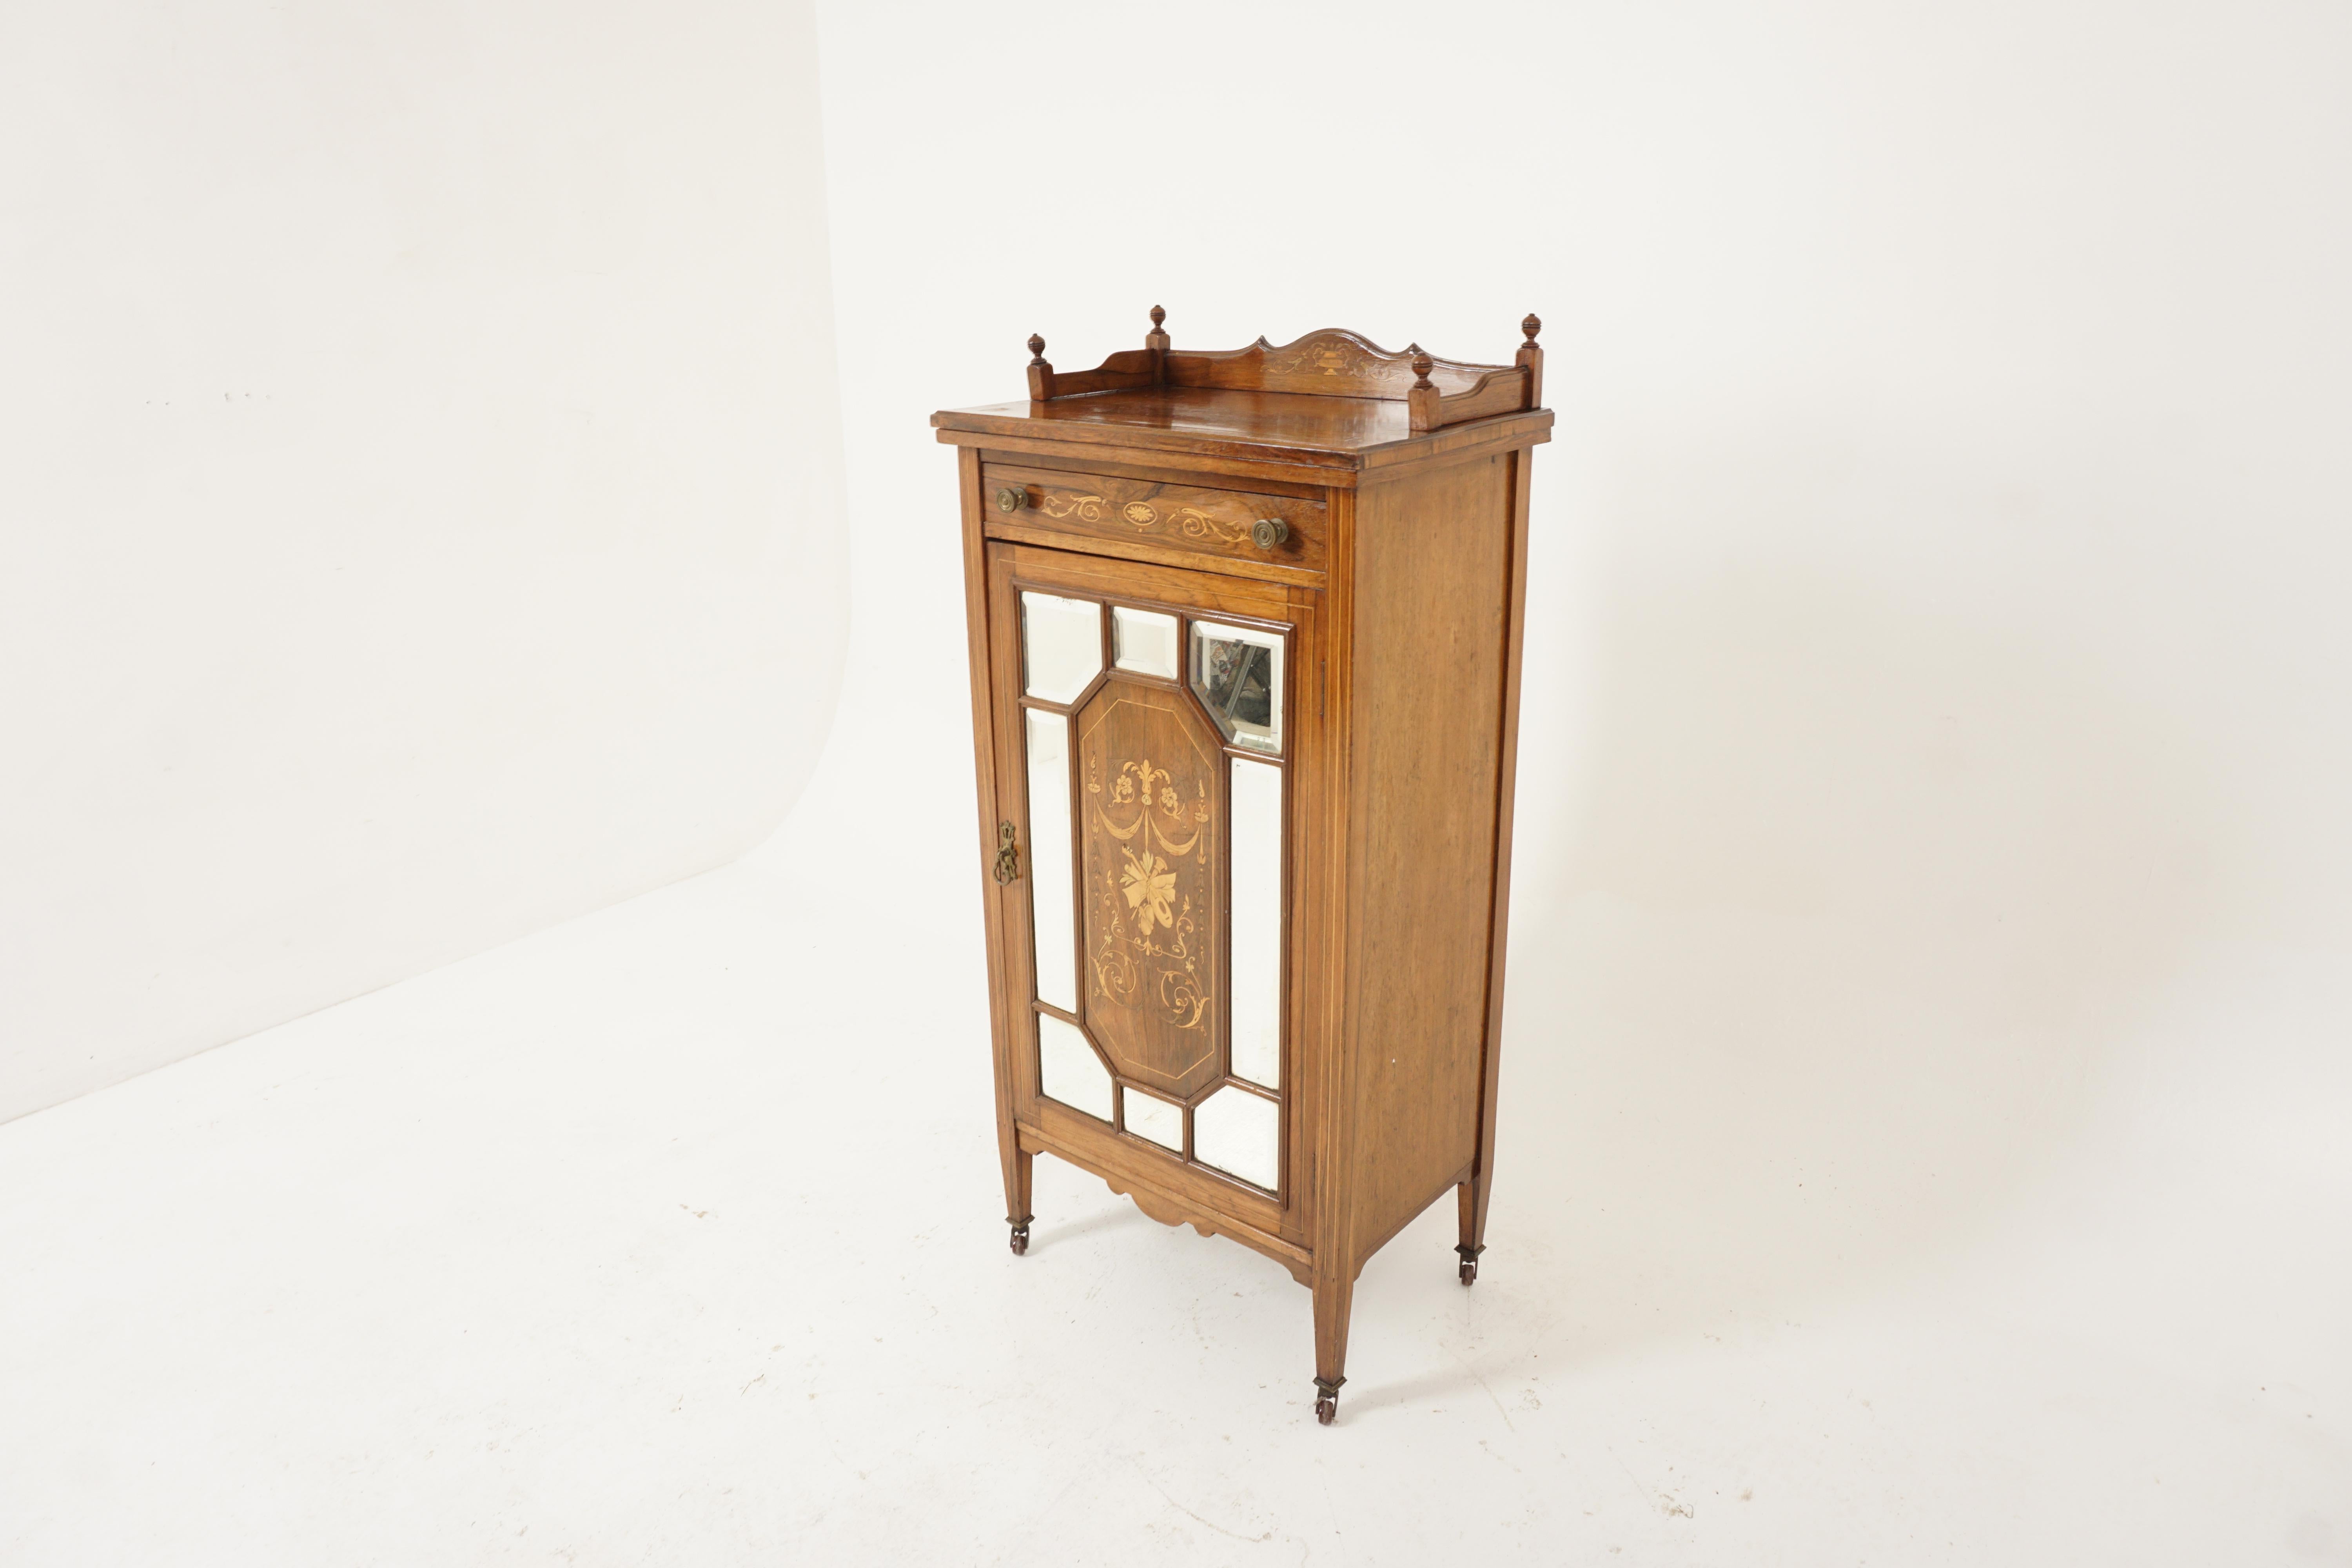 Antique Edwardian Inlaid Music cabinet, display cabinet, Scotland 1900, H614

Scotland 1900
Wood
Original finish
Three quarter gallery with finials
Single inlaid drawer with original hardware
Single door with marquetry
Inlaid (flowers with musical